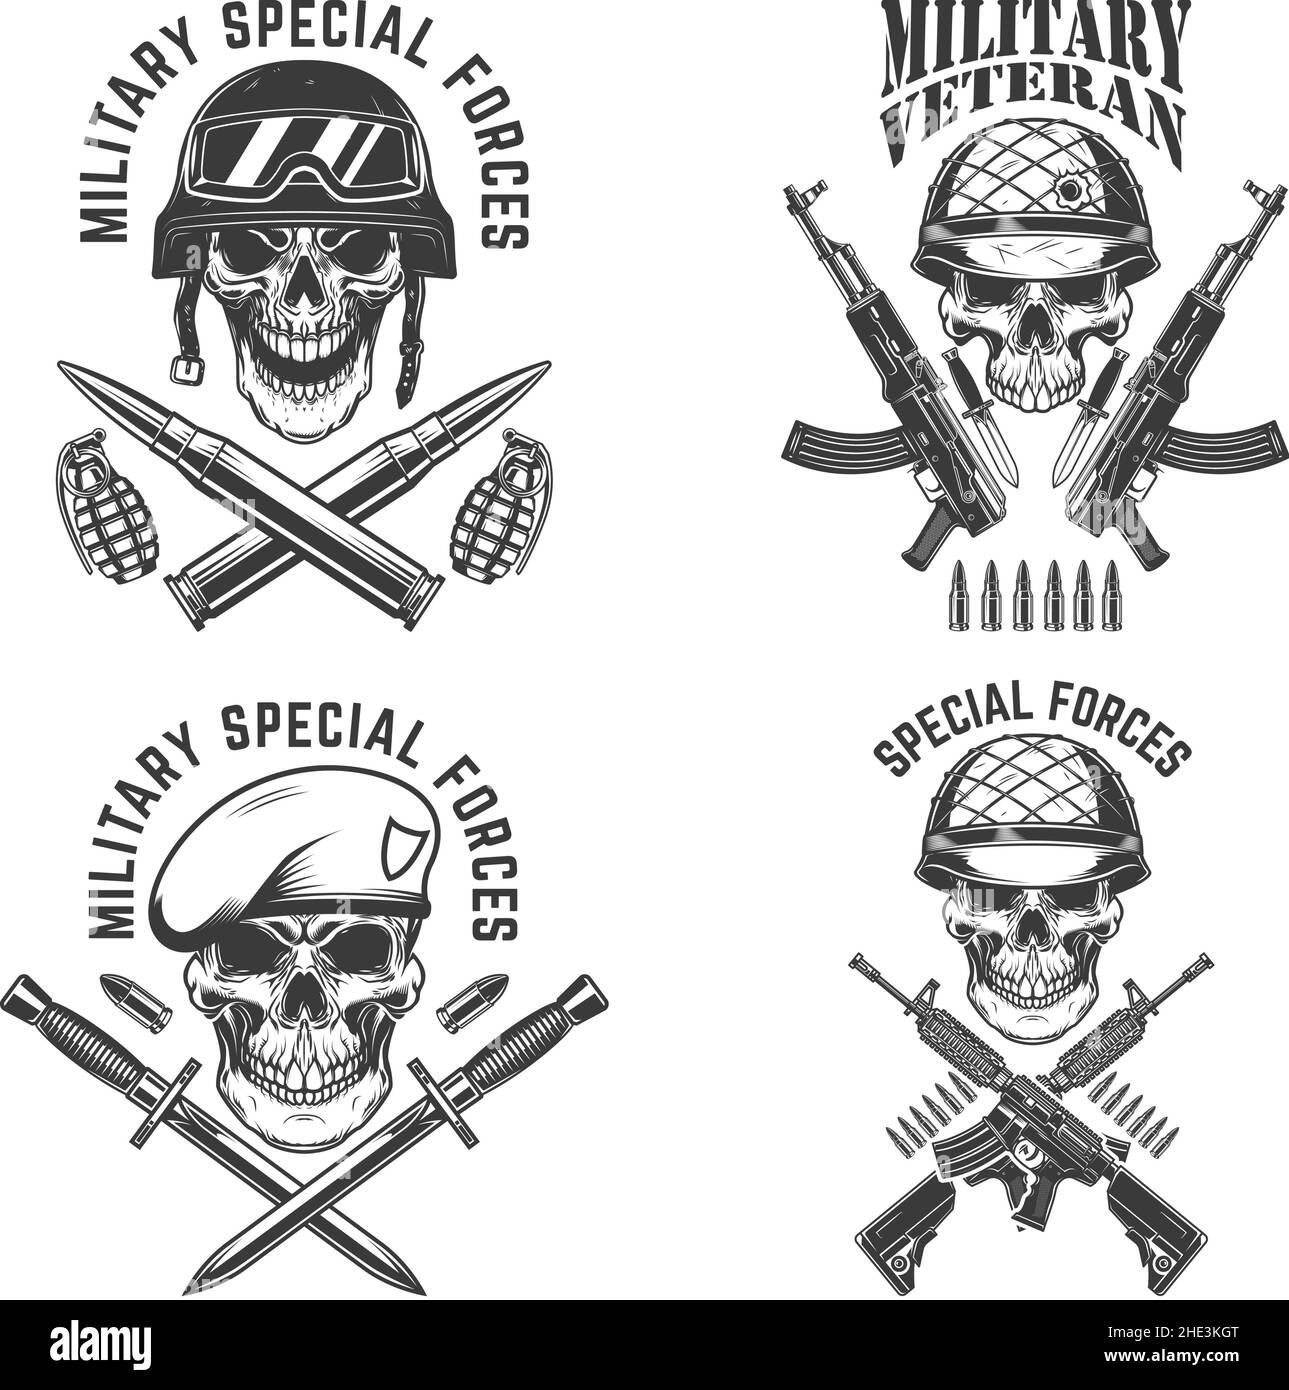 Military veteran. Special forces. Crossed assault rifles with soldier skull in army helmet. Design element for logo, label, sign, emblem. Vector illus Stock Vector